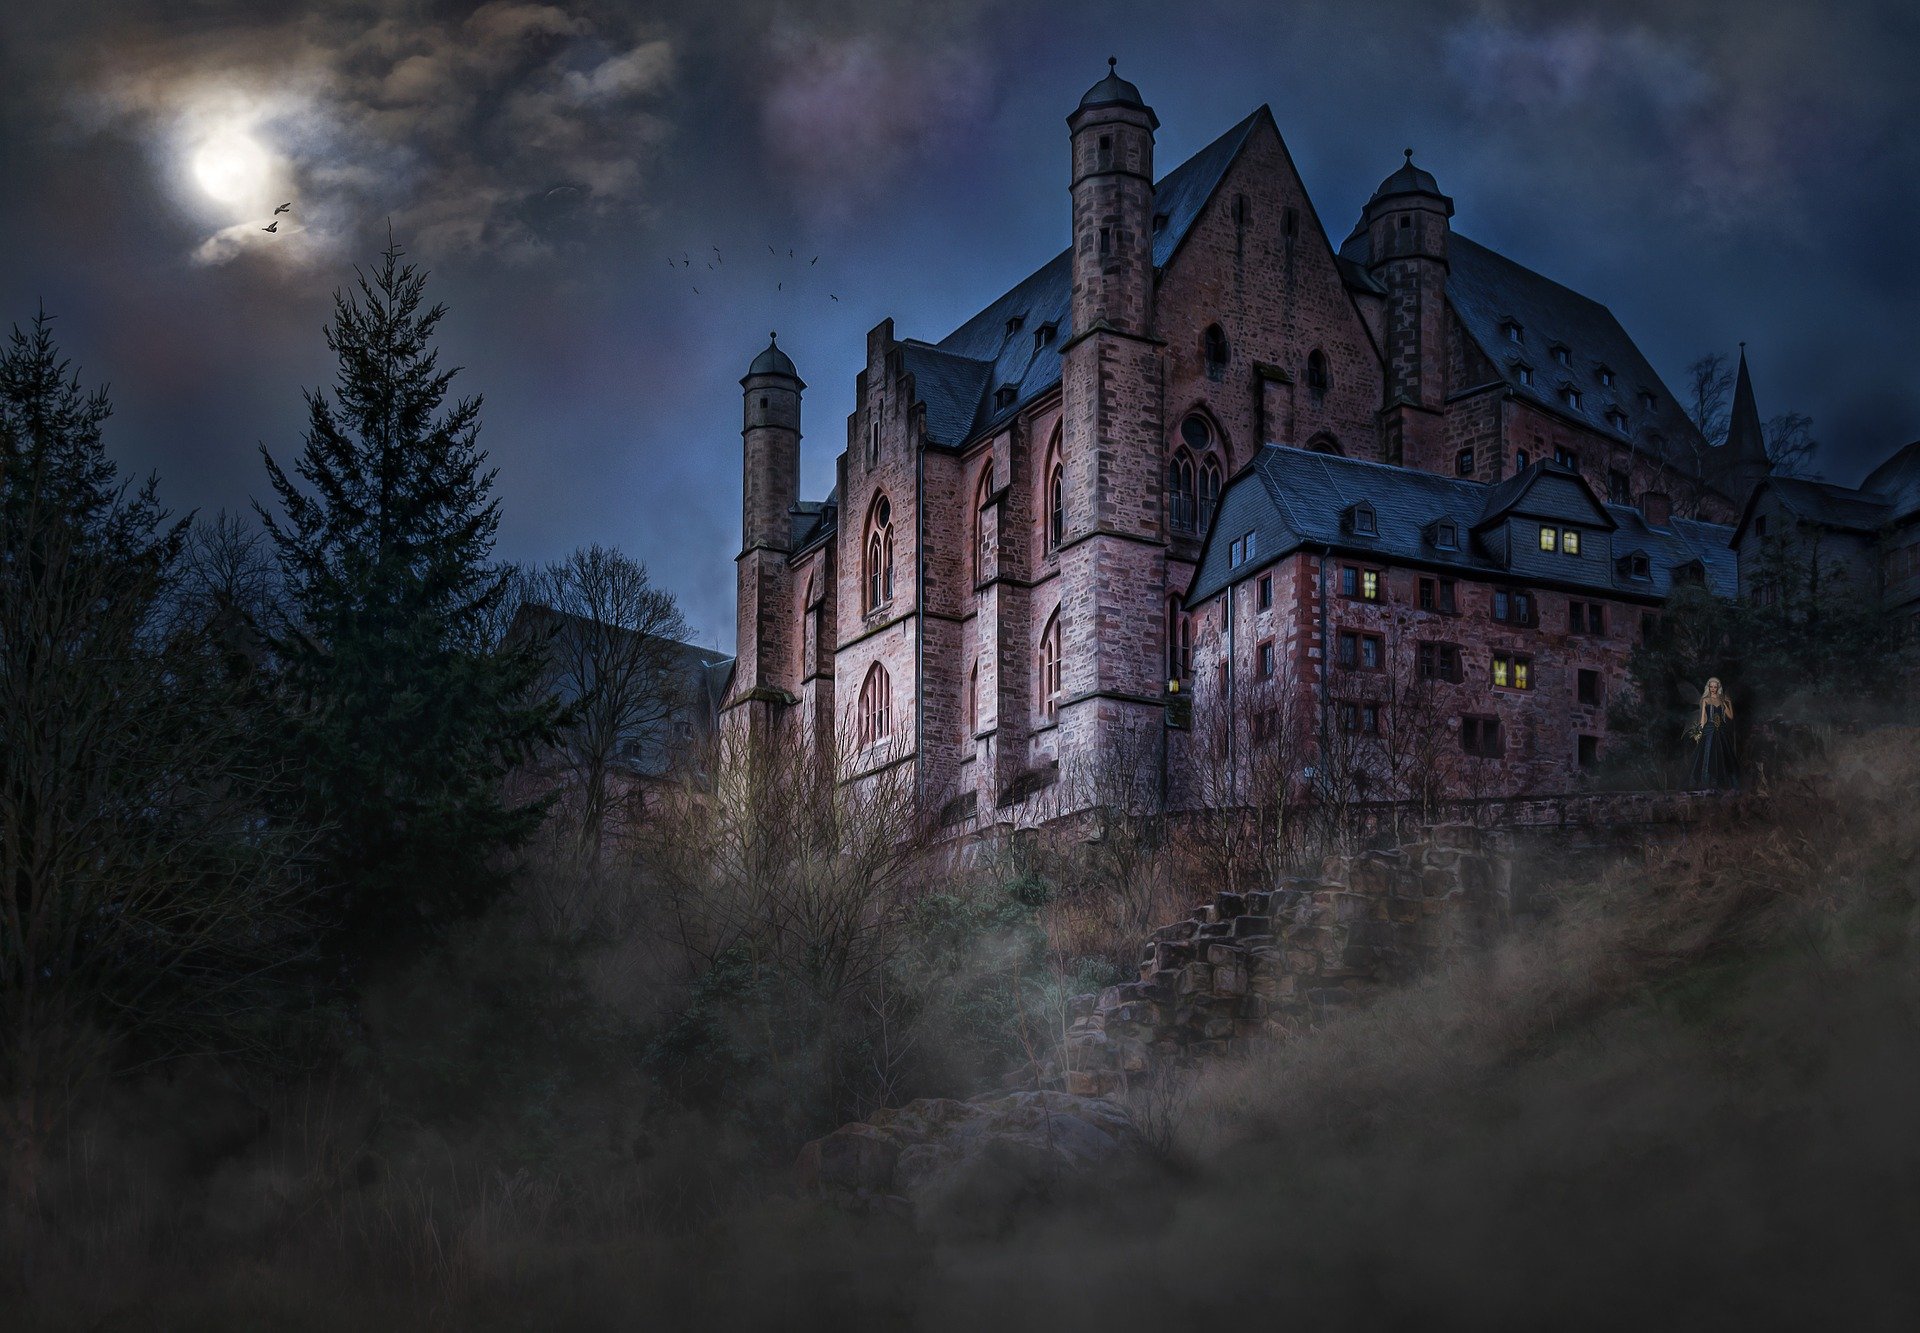 An eerie castle with a woman standing outside | Photo: Pixabay/Reinhold Silbermann